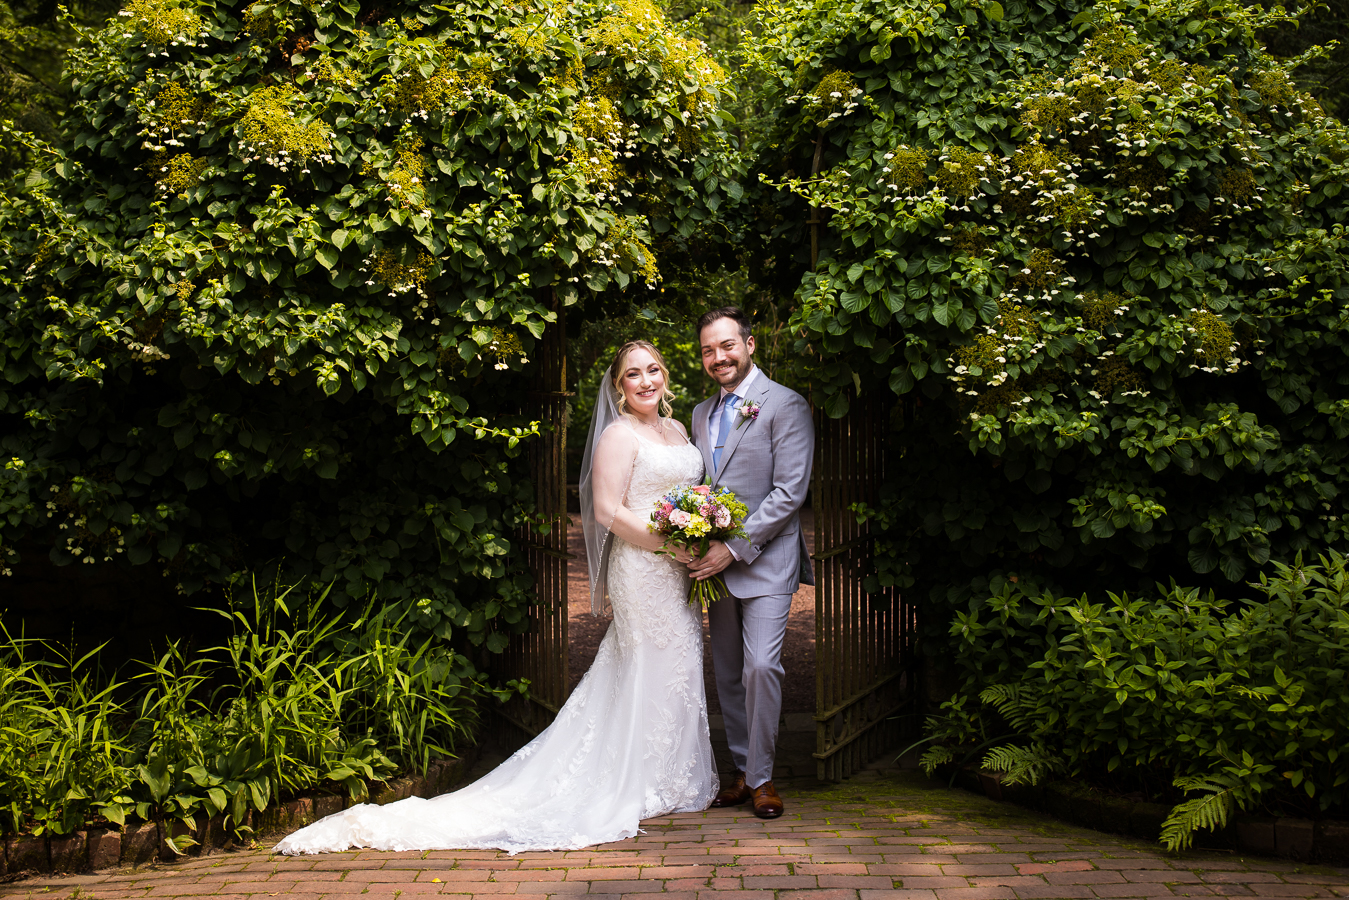 traditional portrait photographer, lisa rhinehart, captures this image of the bride and groom standing with each other in front of the gateway surrounded by lush greenery